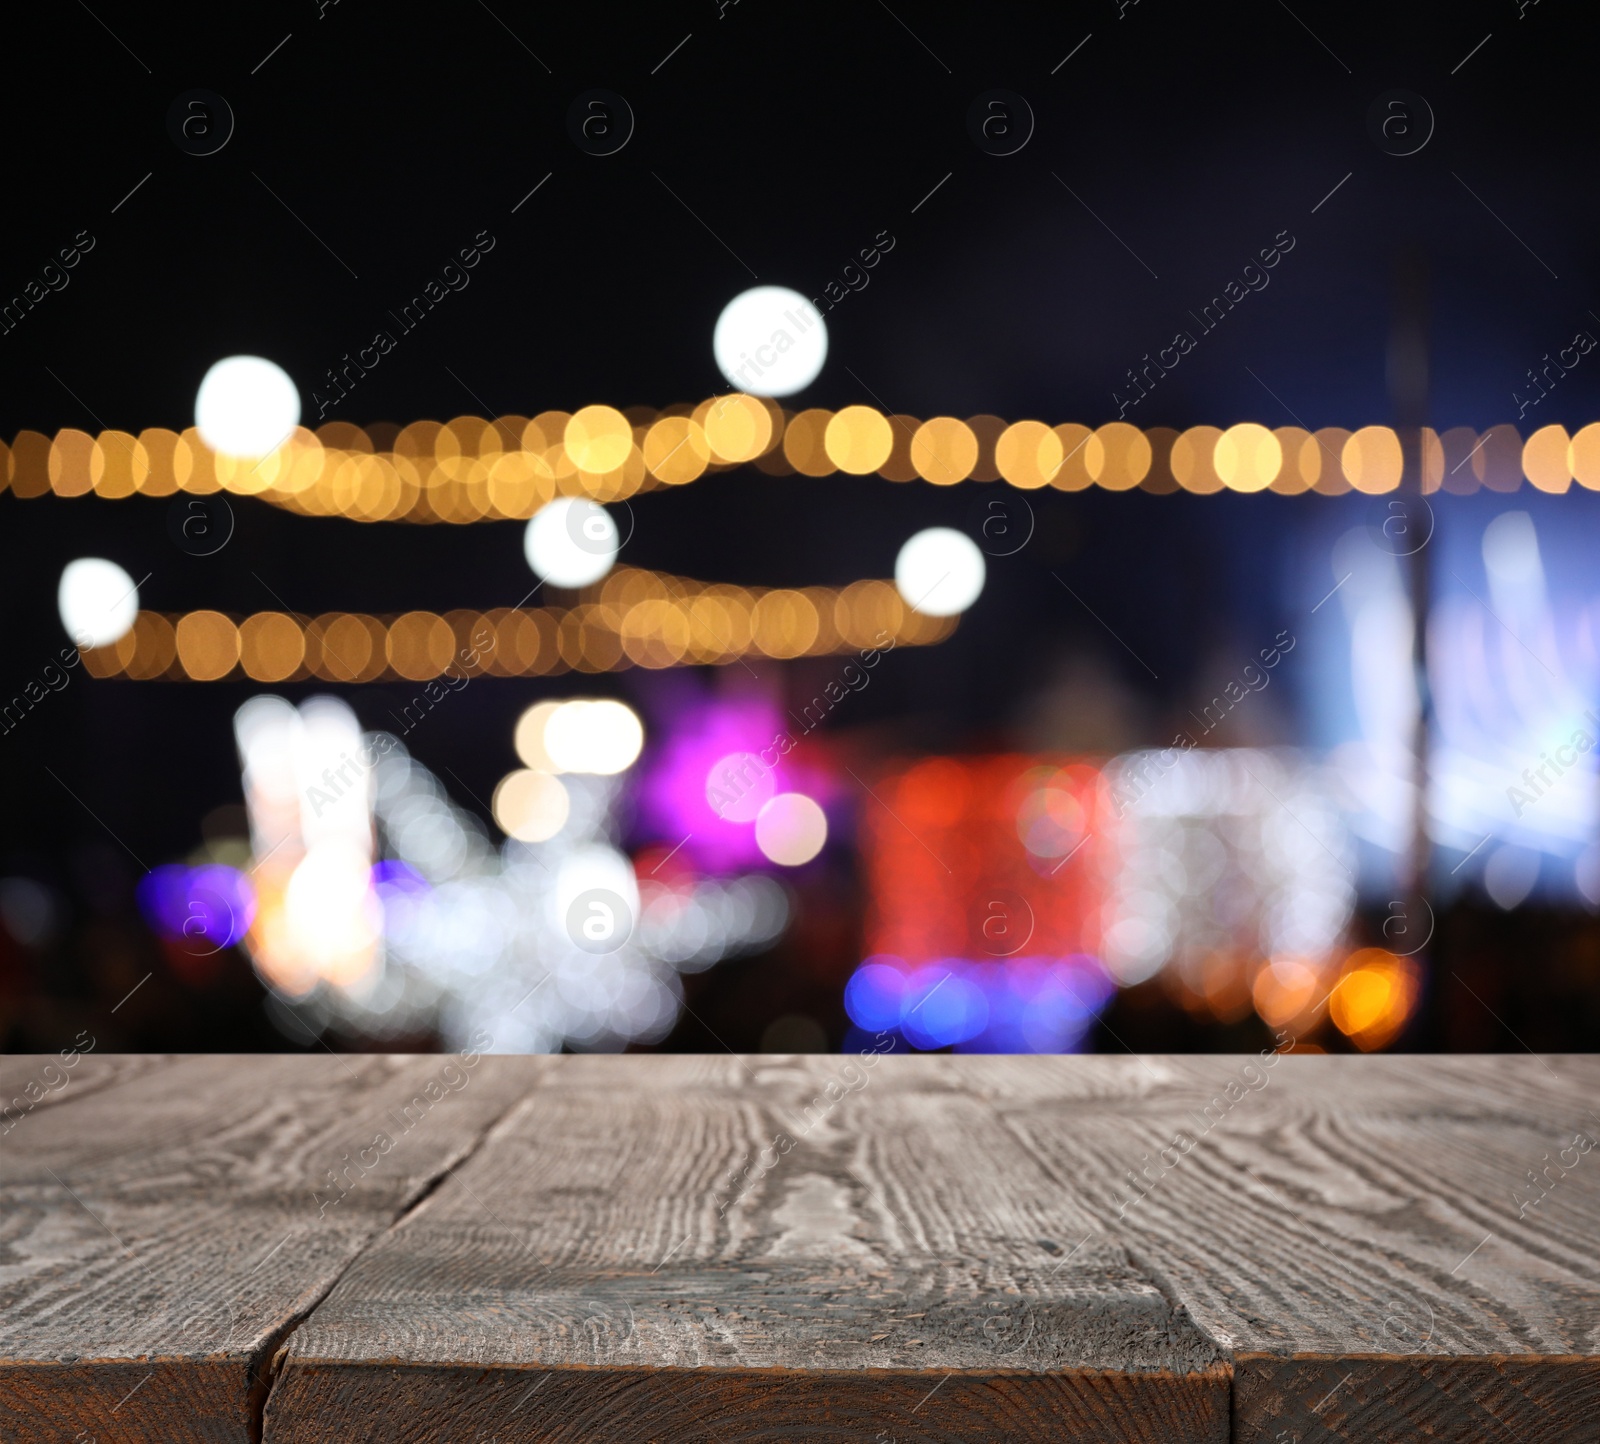 Image of Empty wooden surface against blurred lights. Bokeh effect 